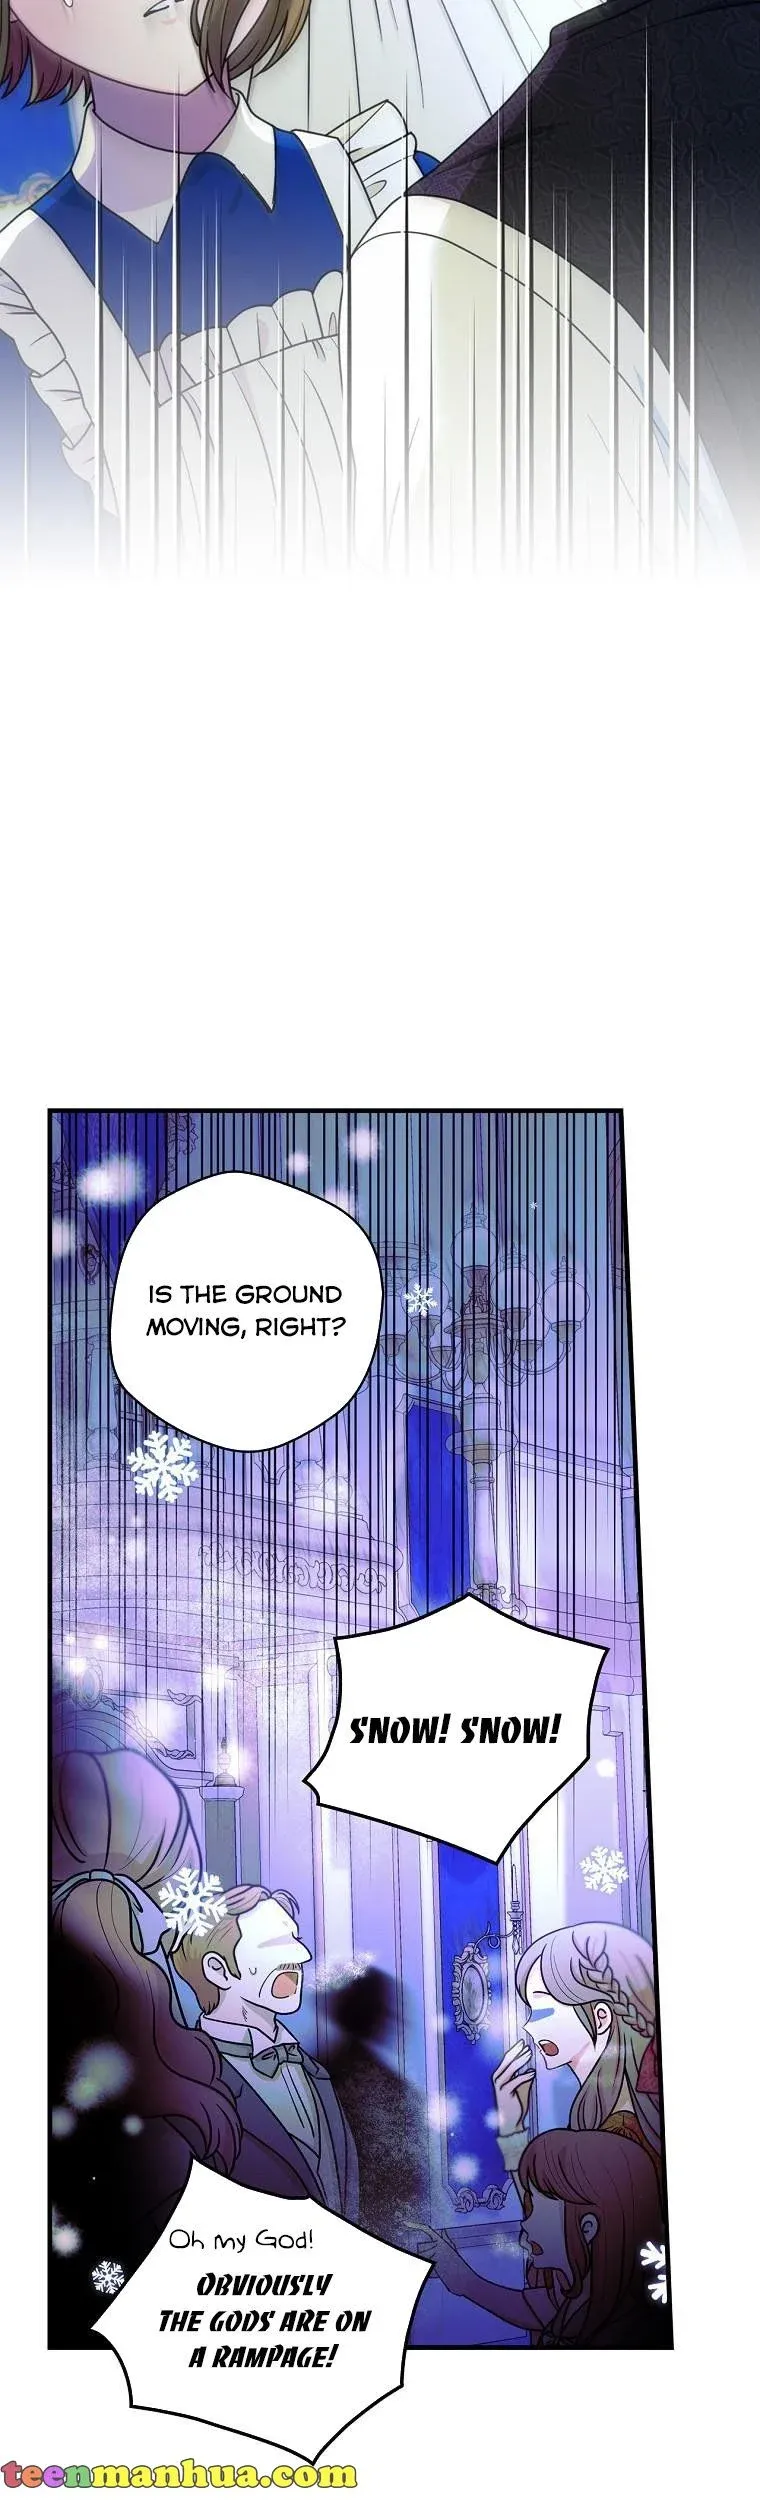 Knight of the Frozen Flower Chapter 50 page 5 - MangaWeebs.in